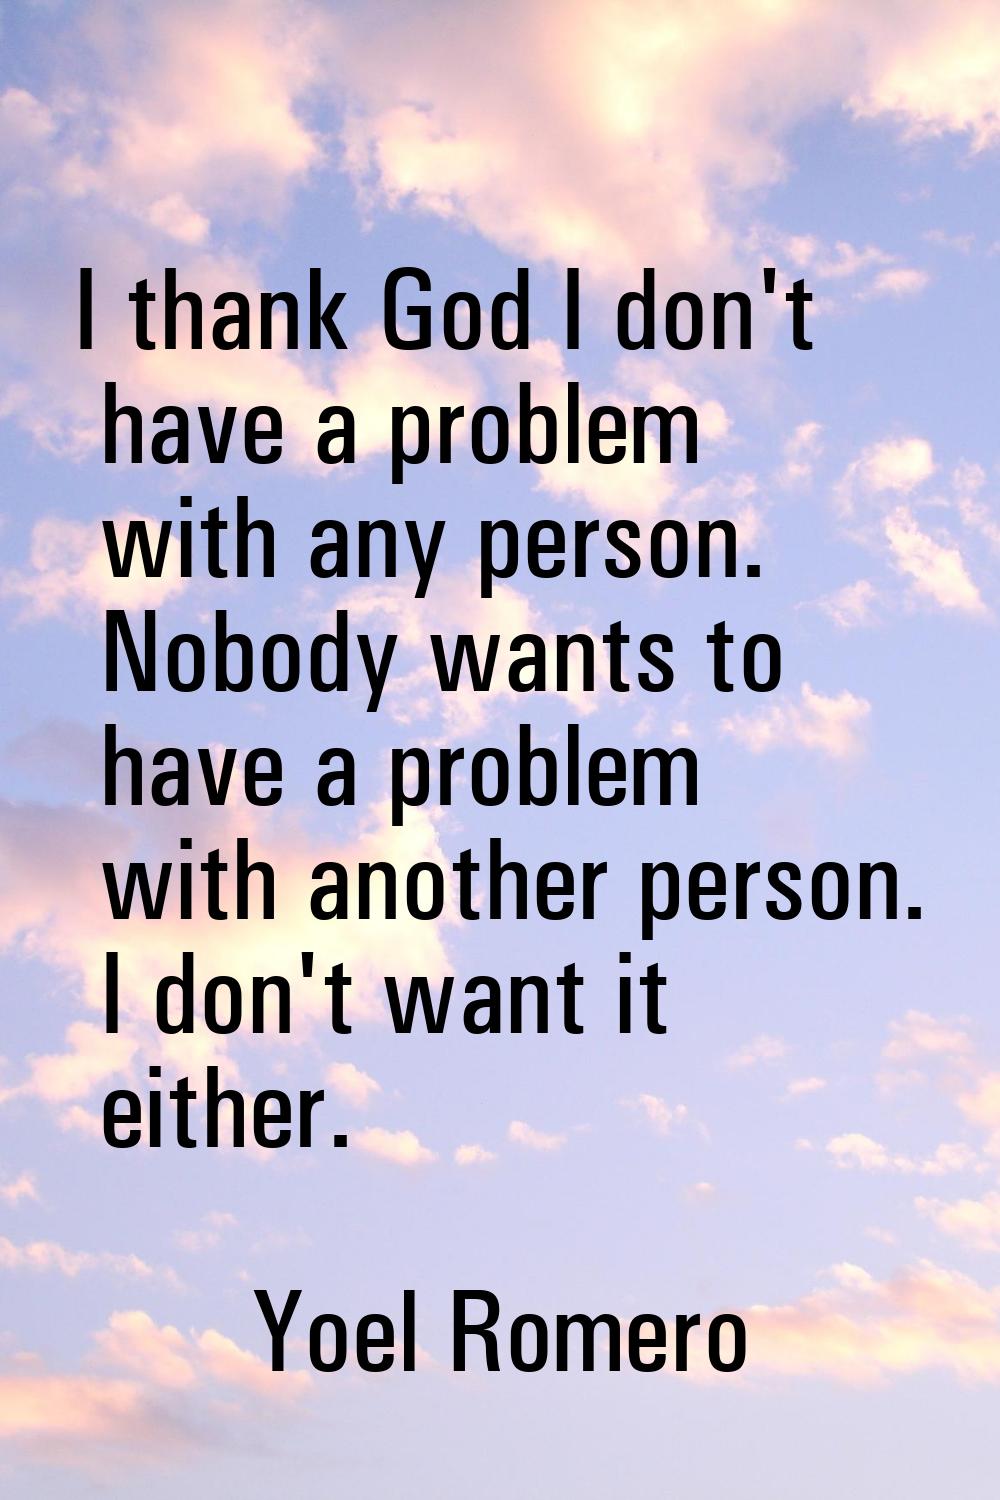 I thank God I don't have a problem with any person. Nobody wants to have a problem with another per